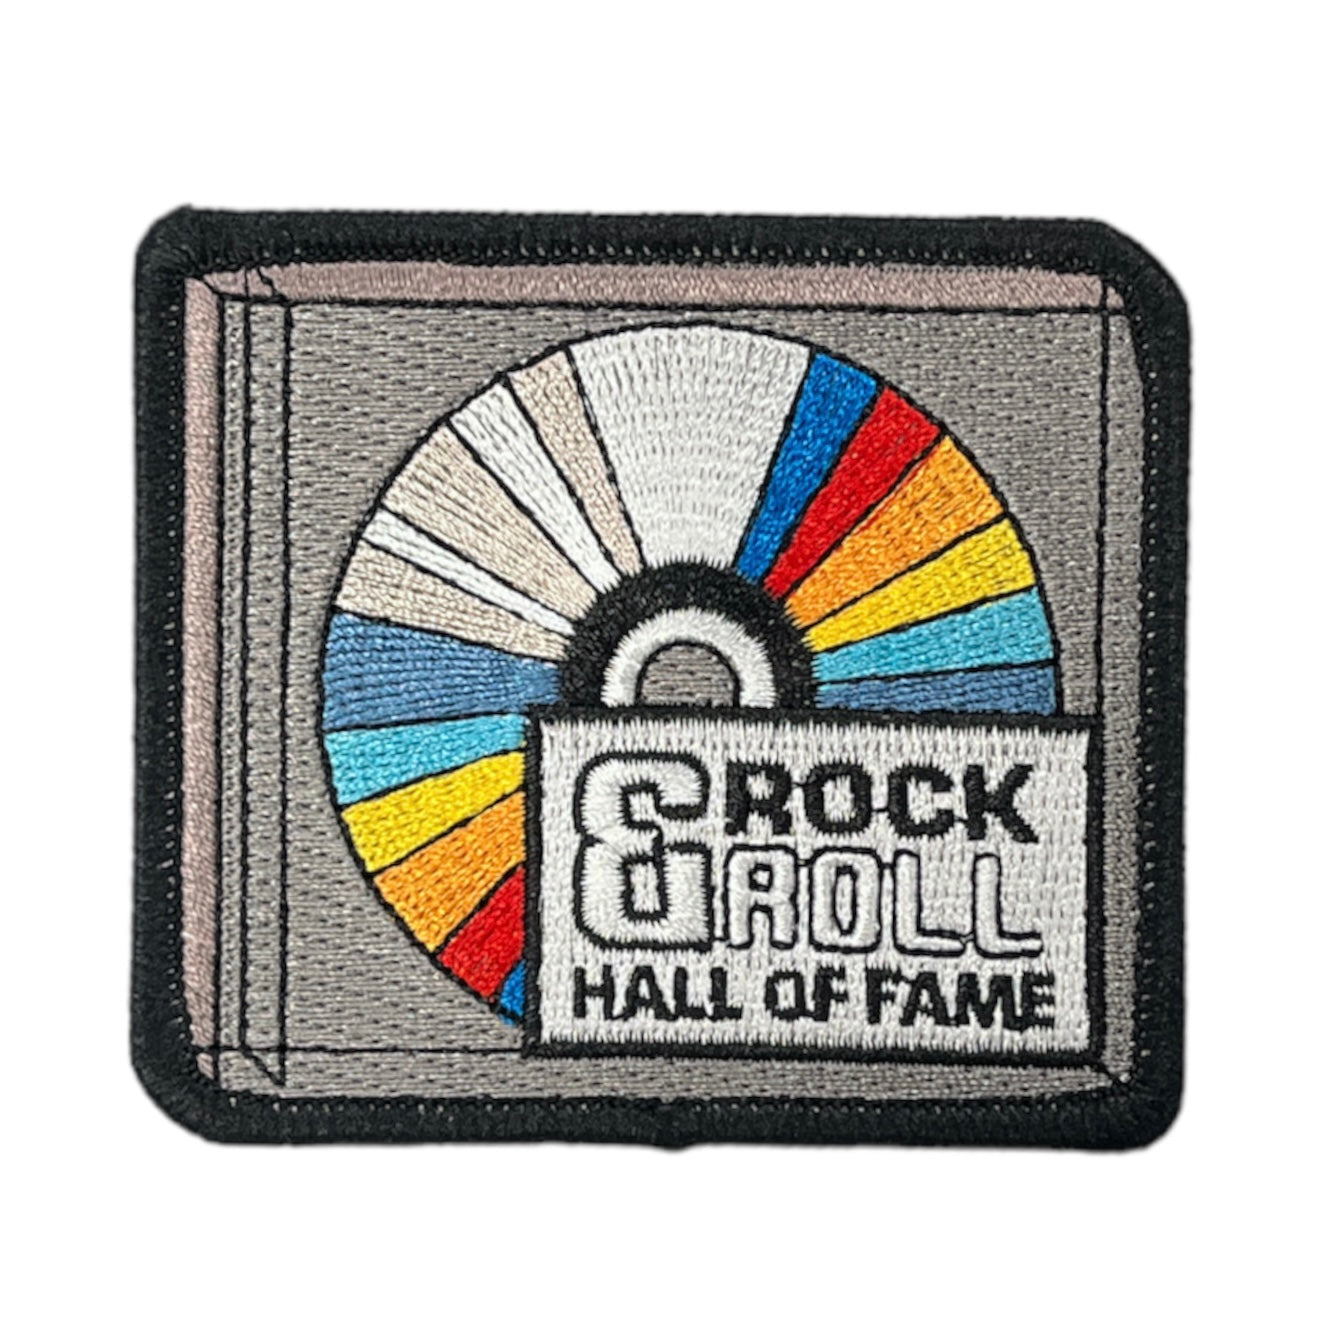 ROCK HALL CD CASE WOVEN PATCH